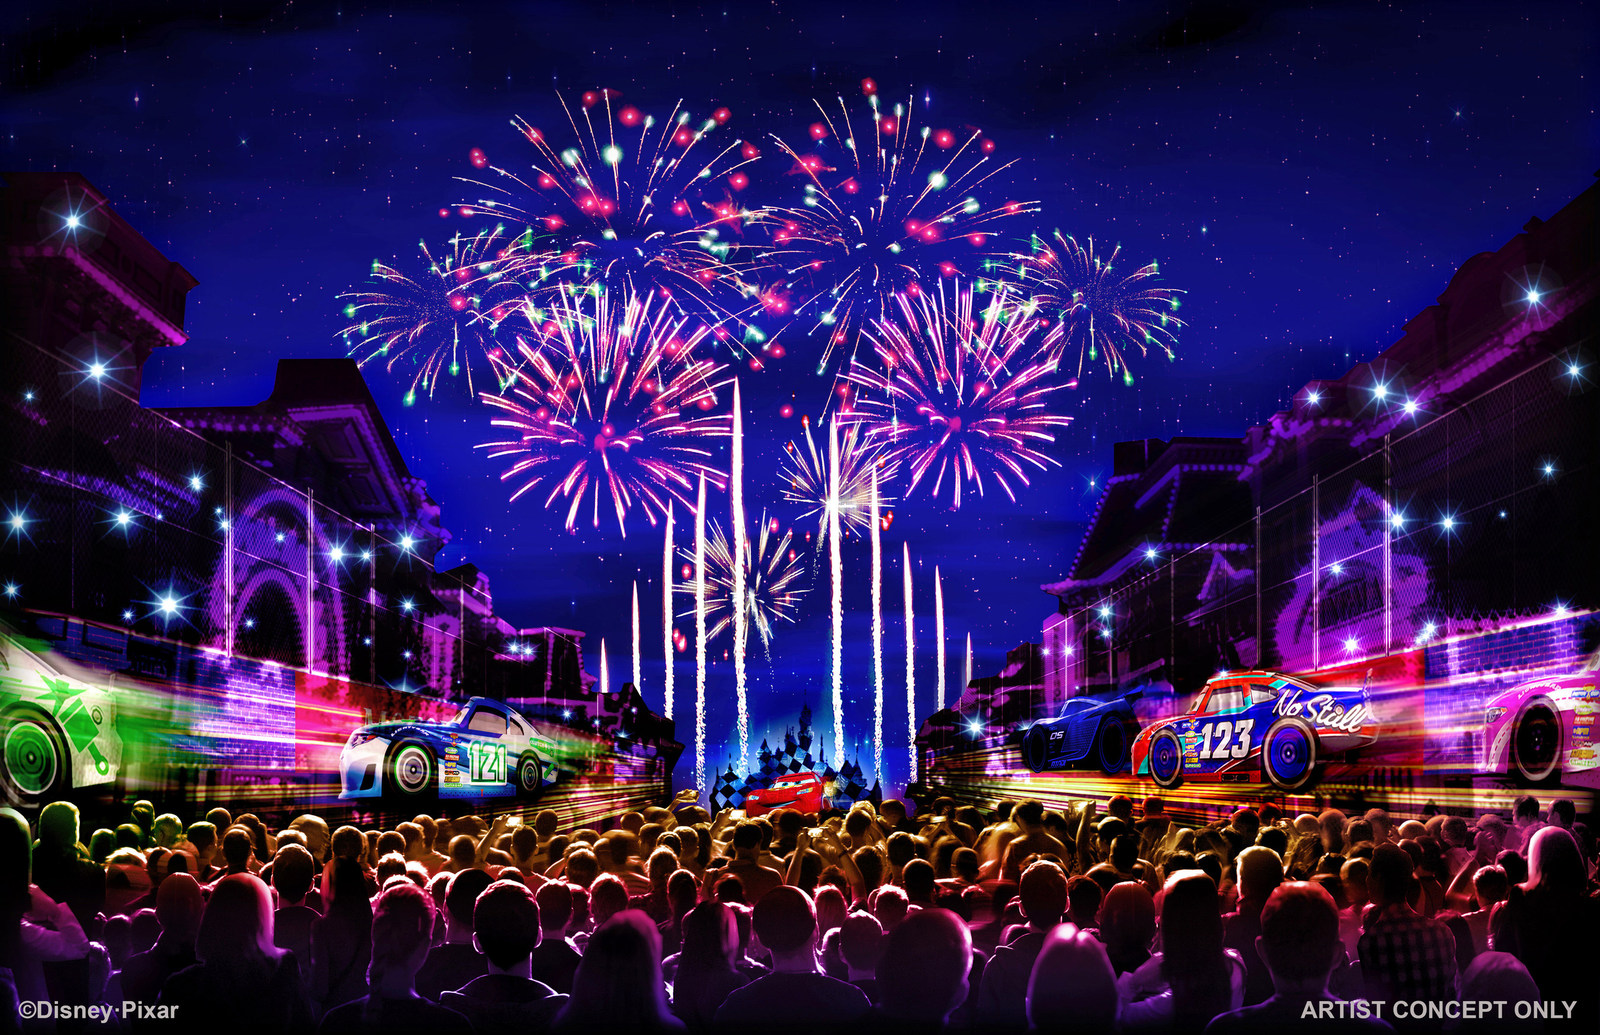 Pixar Fest, the Biggest Theme Park Celebration of Stories and Characters from Pixar Animation Studios, Opens at the Disneyland Resort April 13, 2018